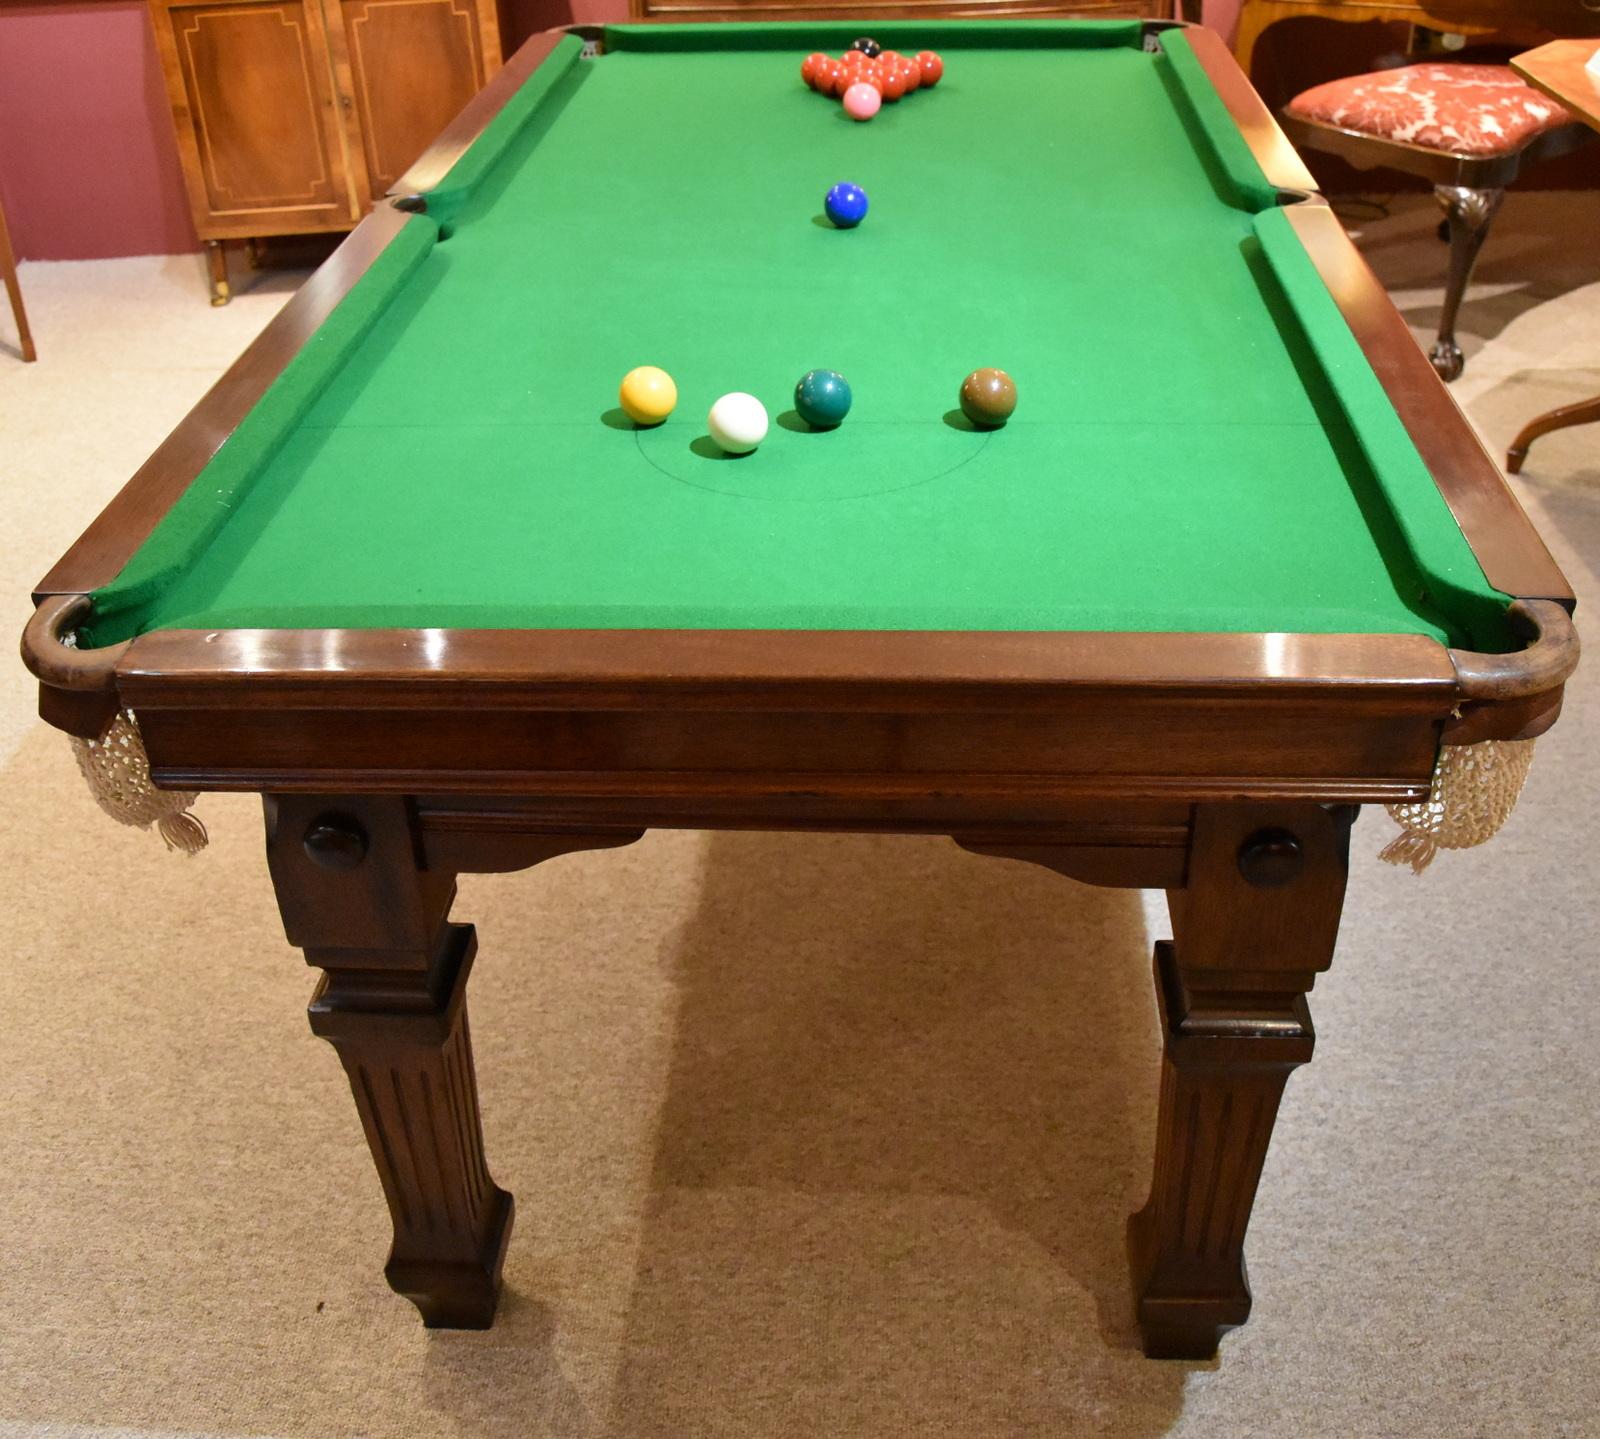 riley snooker table